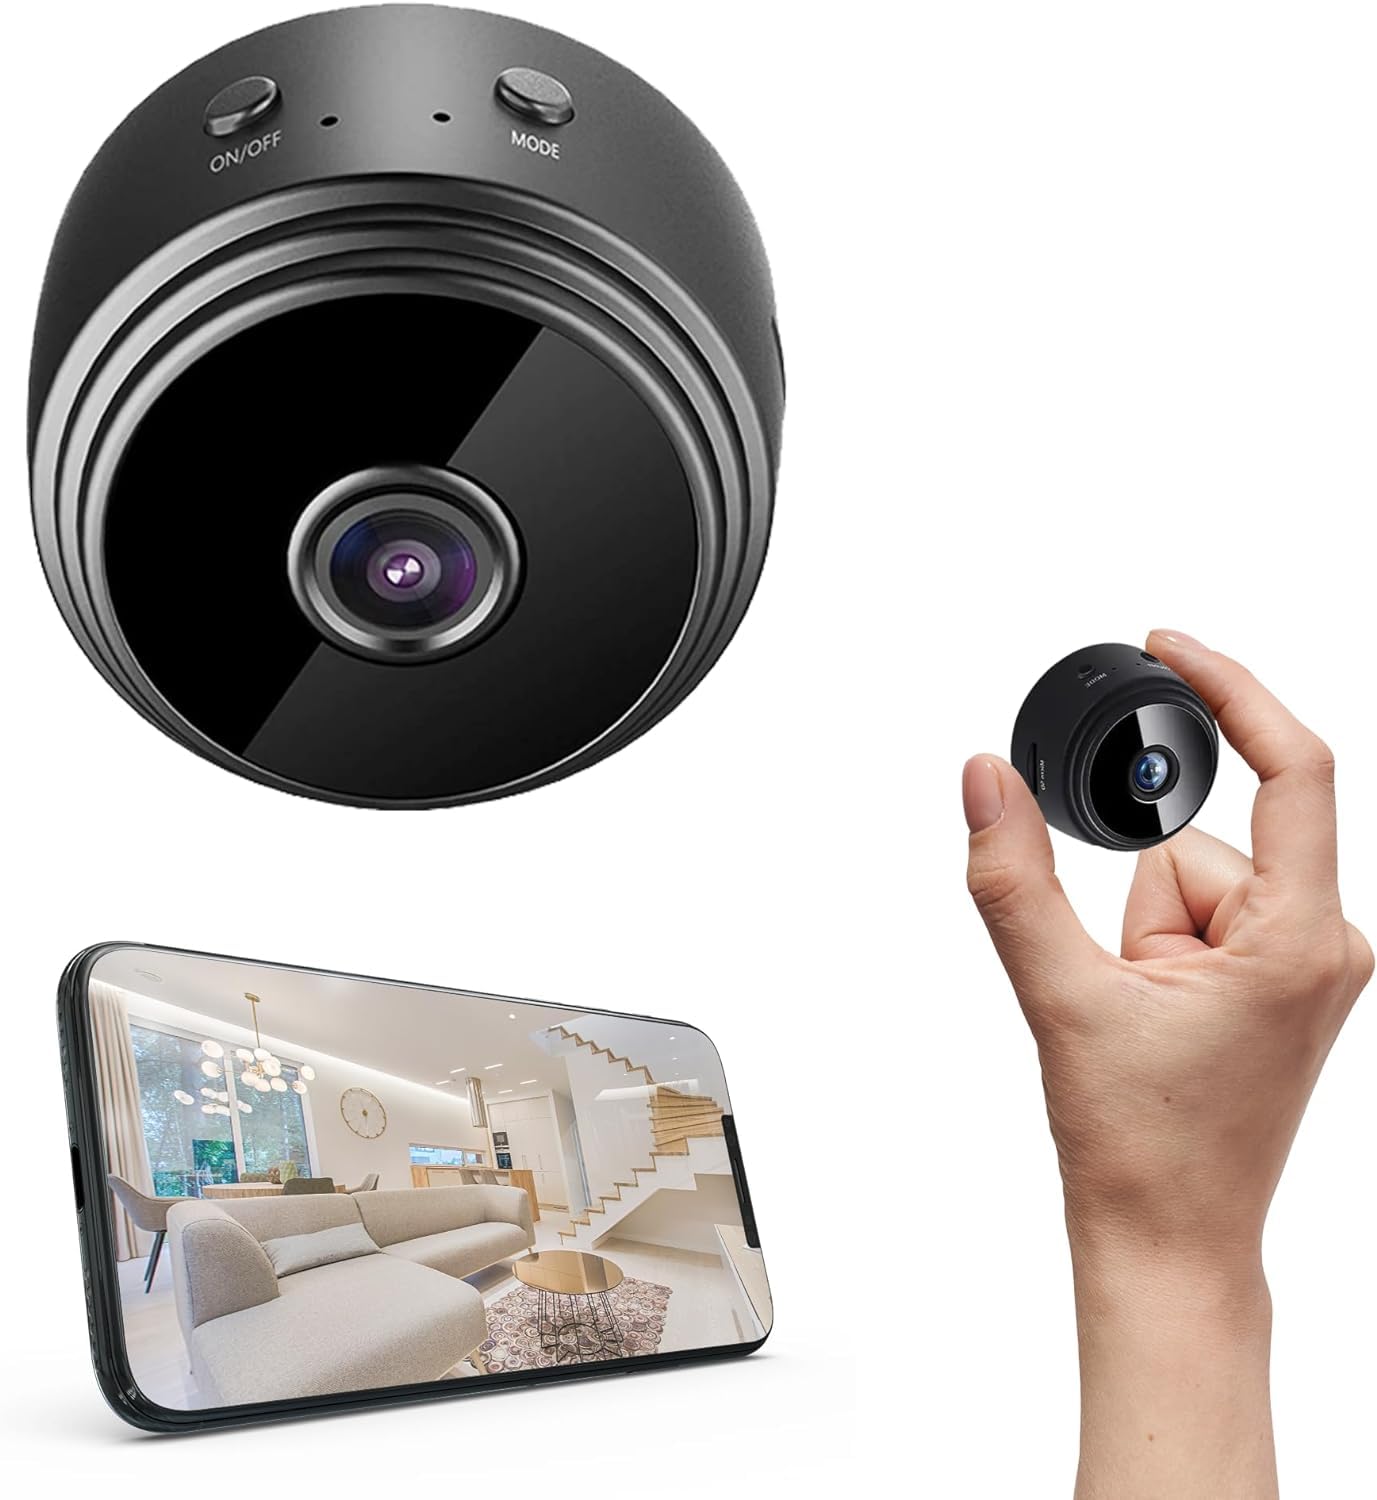 Mini Spy Camera - Wireless WiFi Security Camera with Night Vision for Home, Office, and Family Monitoring